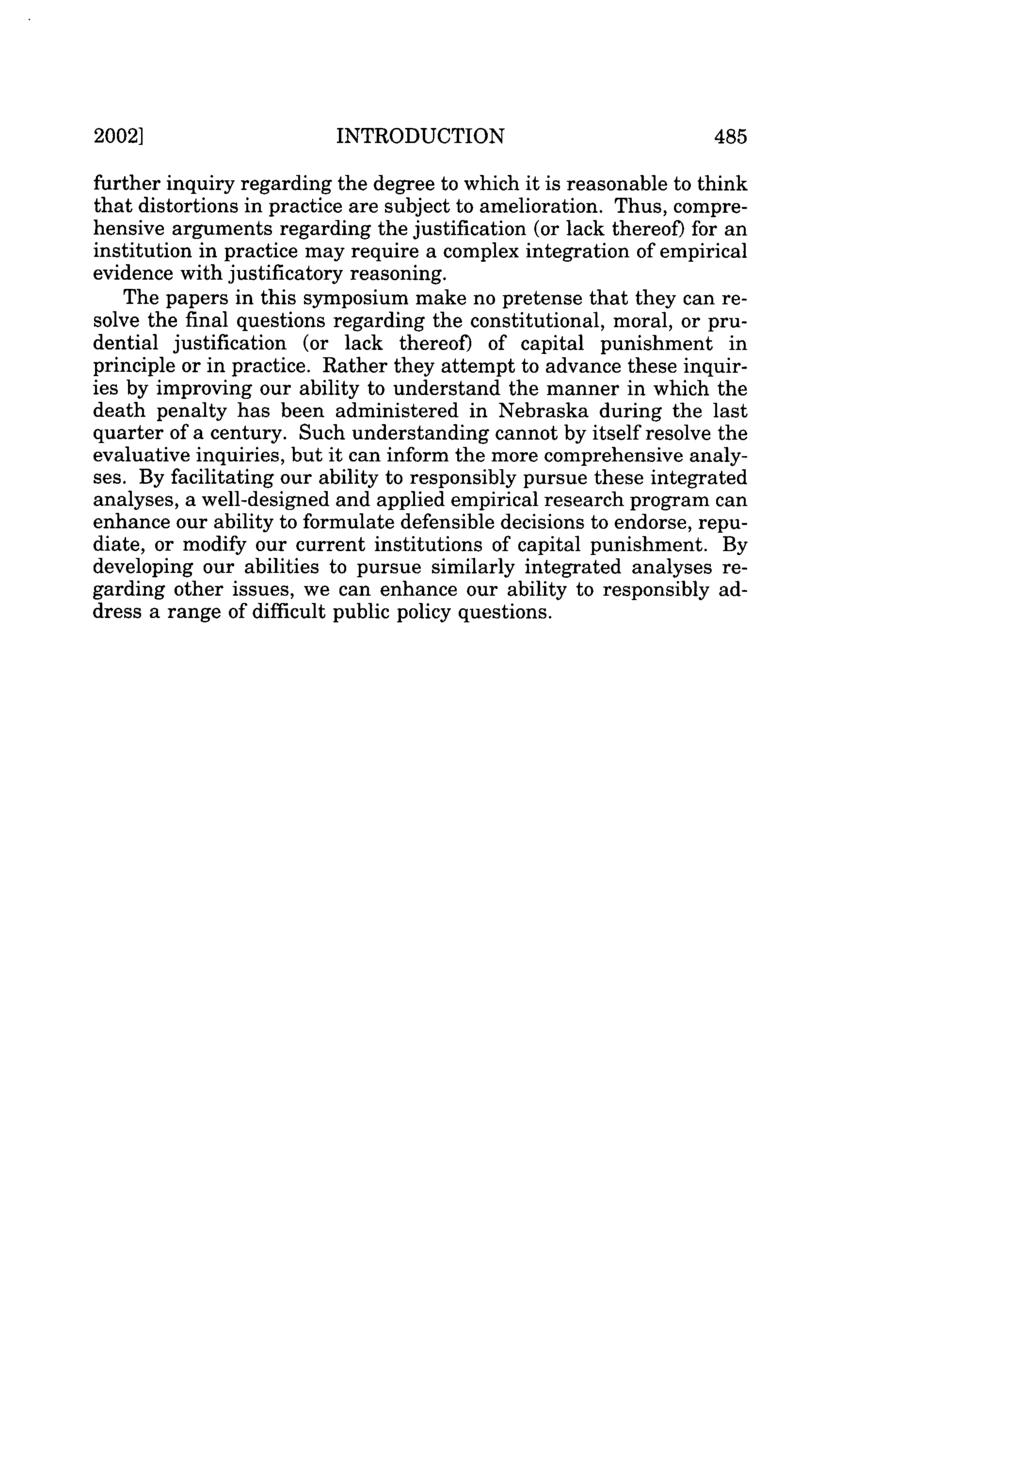 2002] INTRODUCTION further inquiry regarding the degree to which it is reasonable to think that distortions in practice are subject to amelioration.